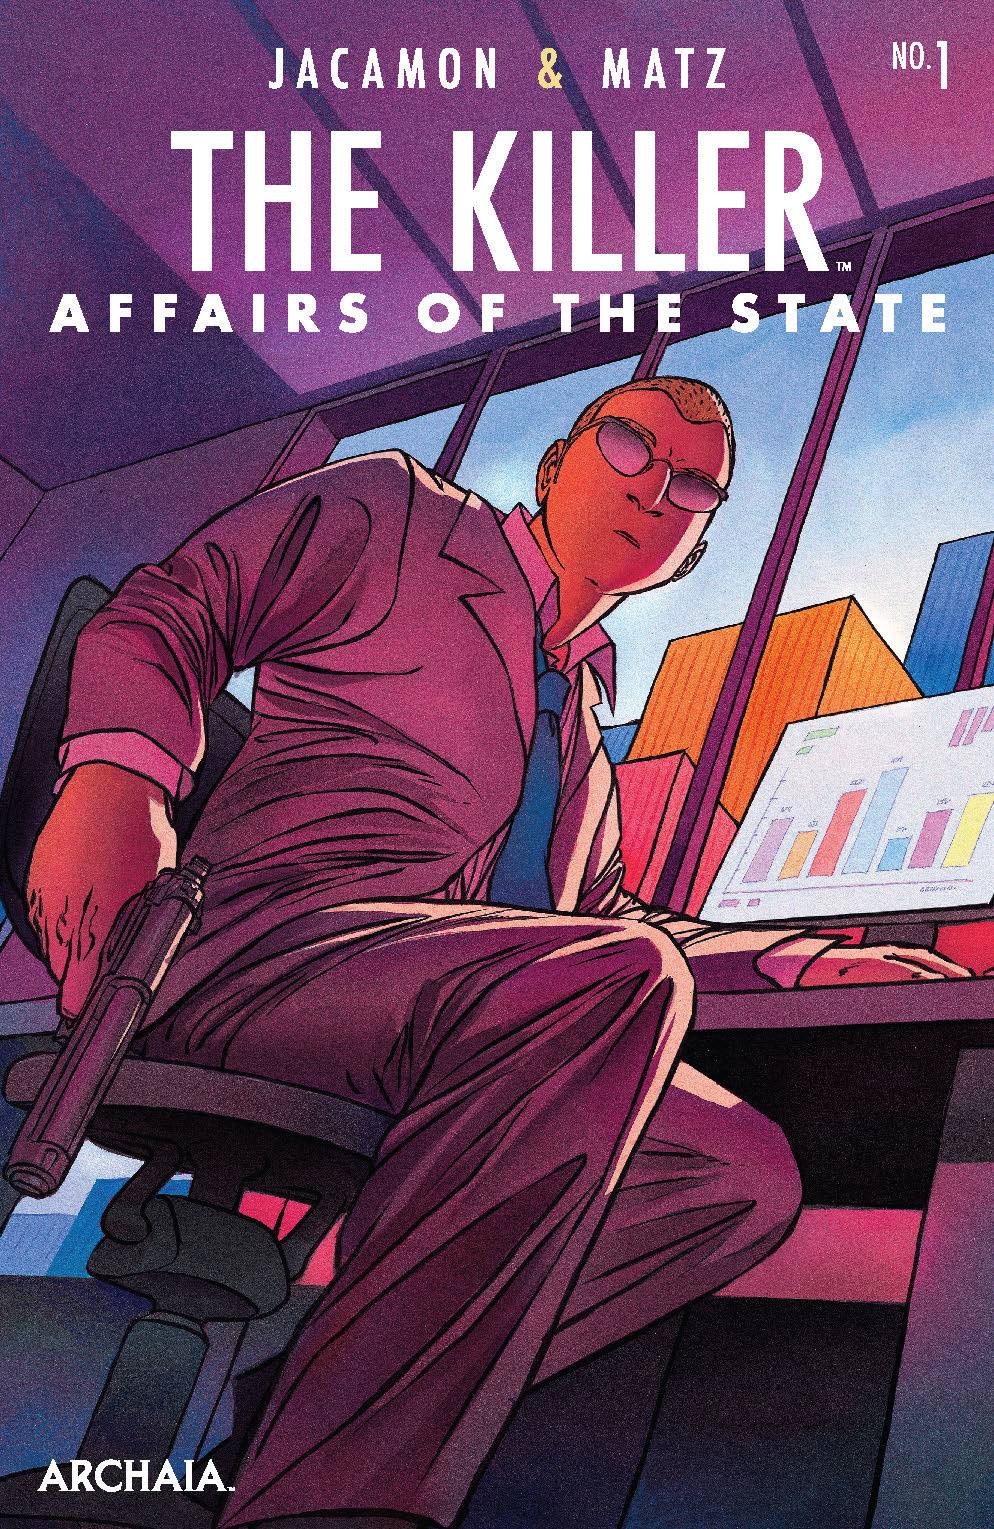 Killer Affairs of State #1 (Cover A - Jacamon)